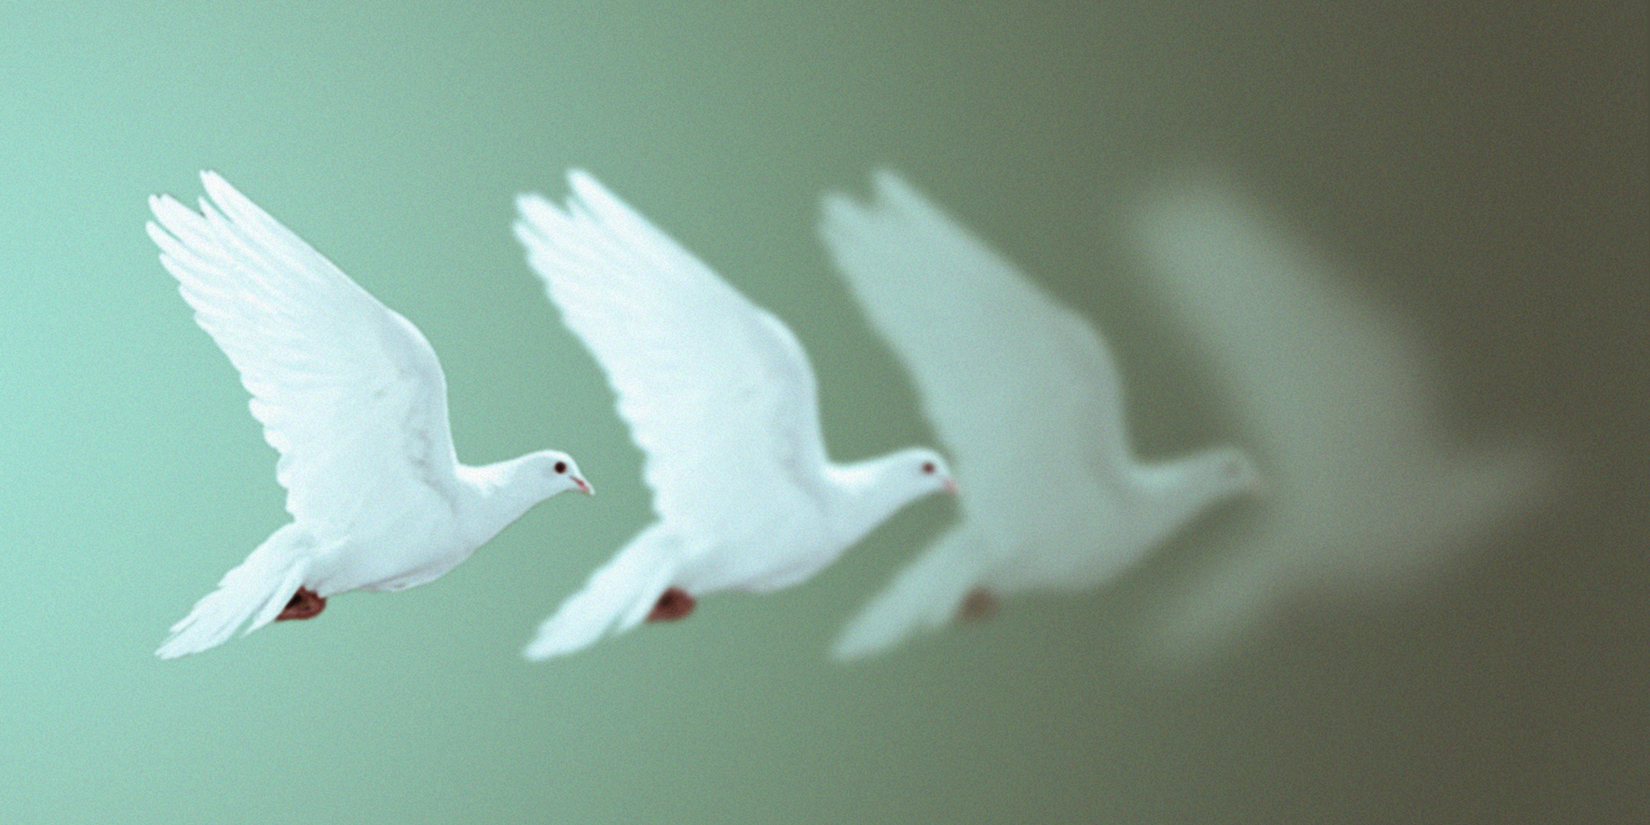 A patterned image of a dove on a sage green background. There are four doves: the one on the left is in focus, and with each dove following, each dove becomes less in focus, as the background also slowly fades to a darker gray.